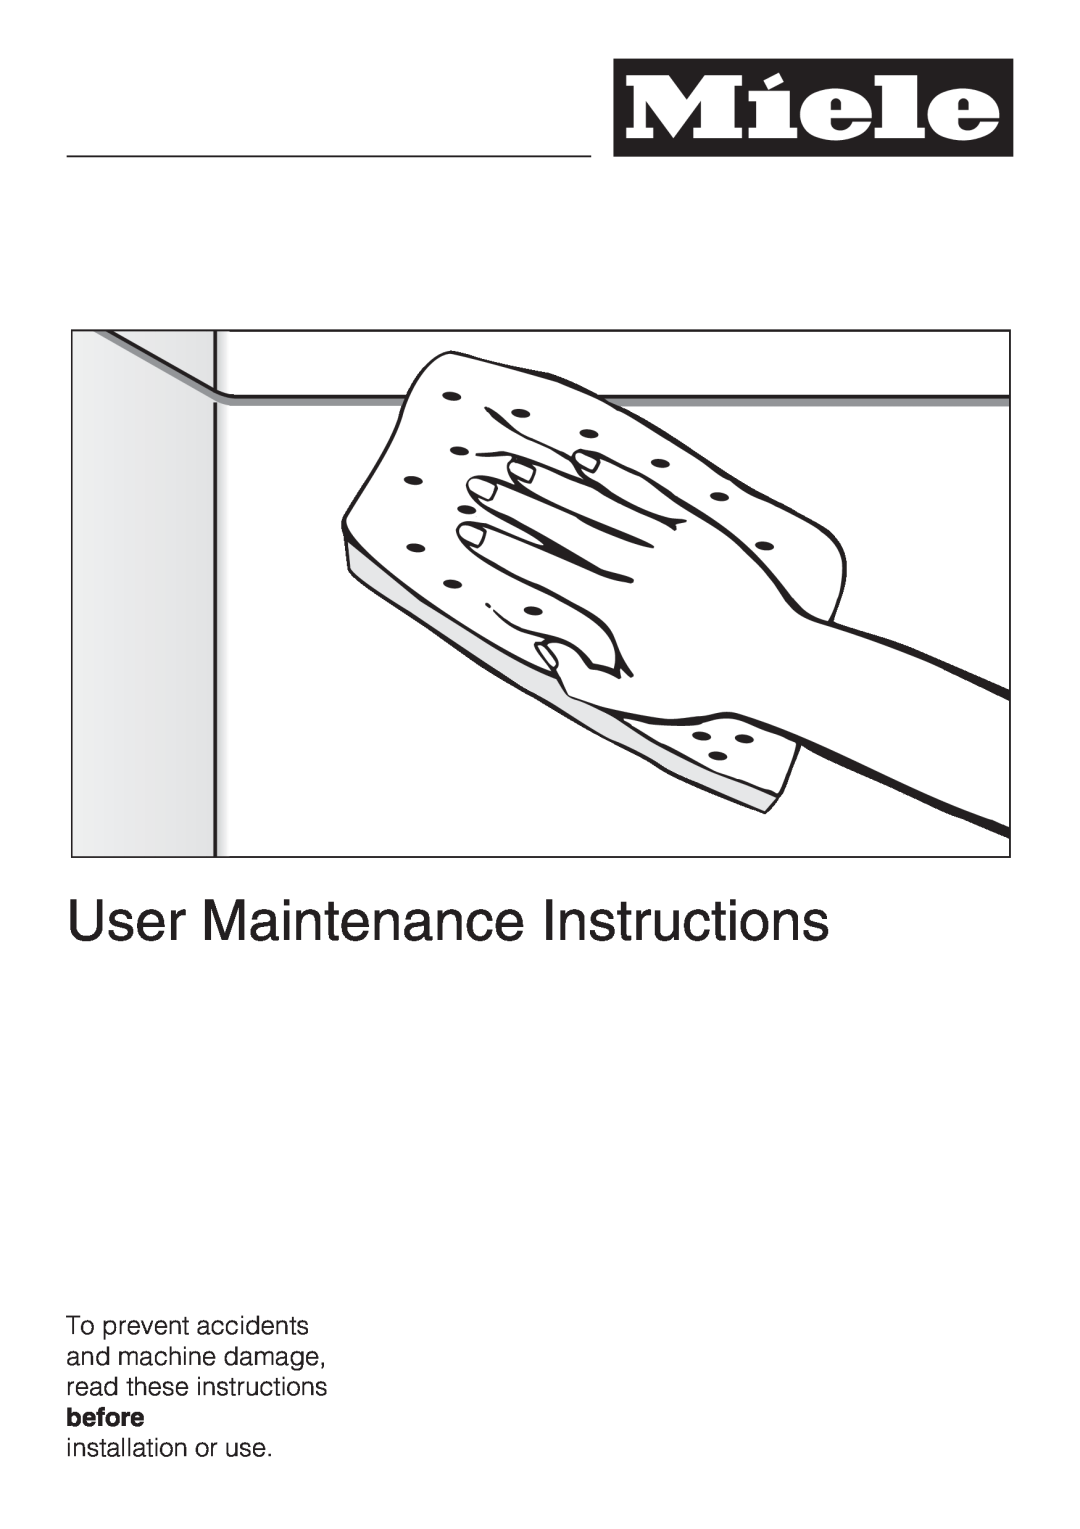 Miele G 5670, G 5675 manual User Maintenance Instructions, installation or use 